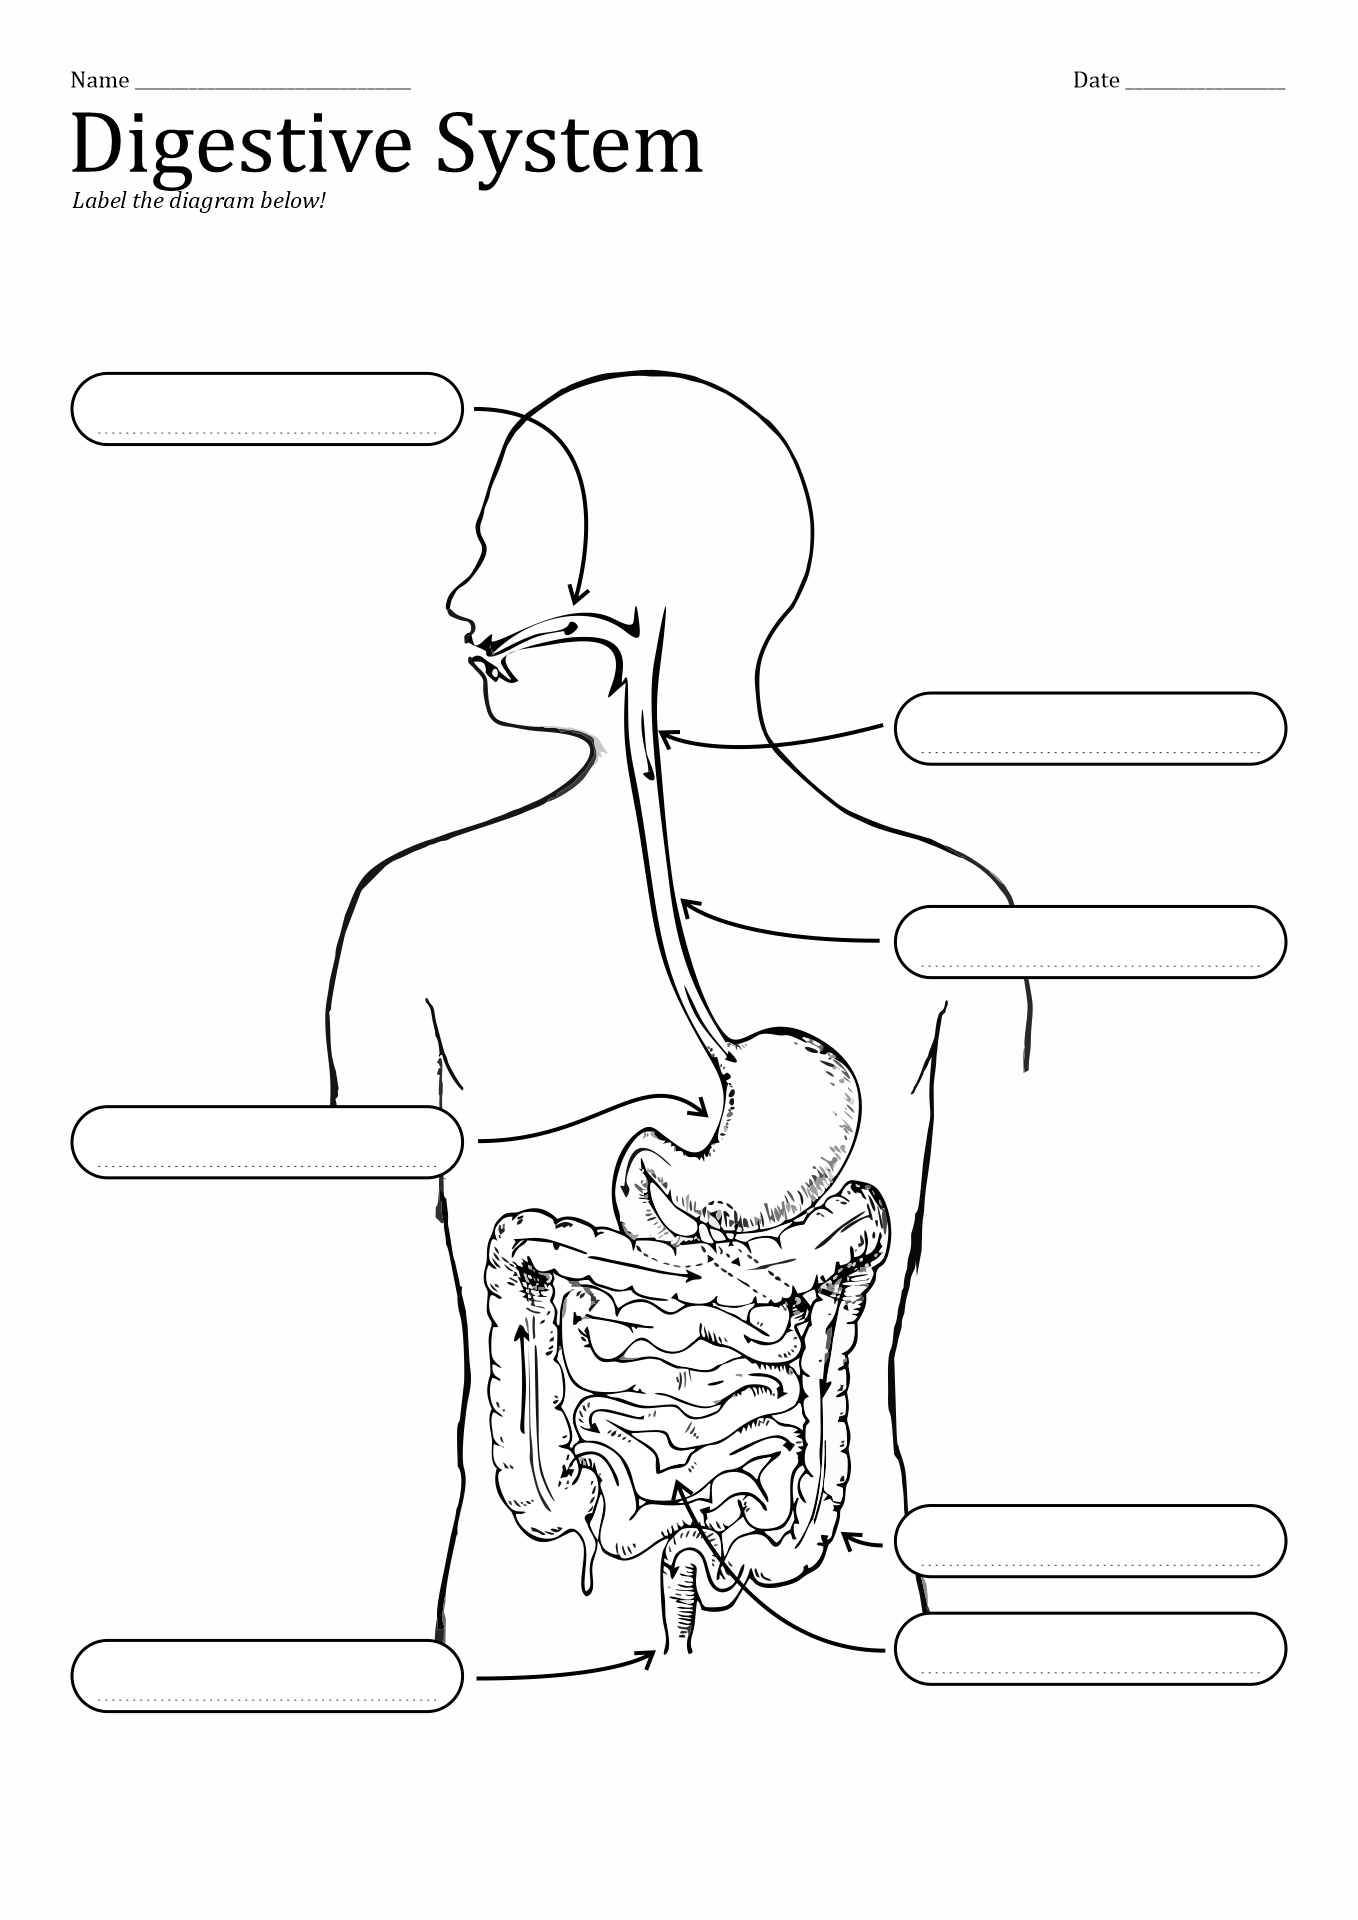 10 Best Images of Unlabeled Digestive System Diagram Worksheet Small